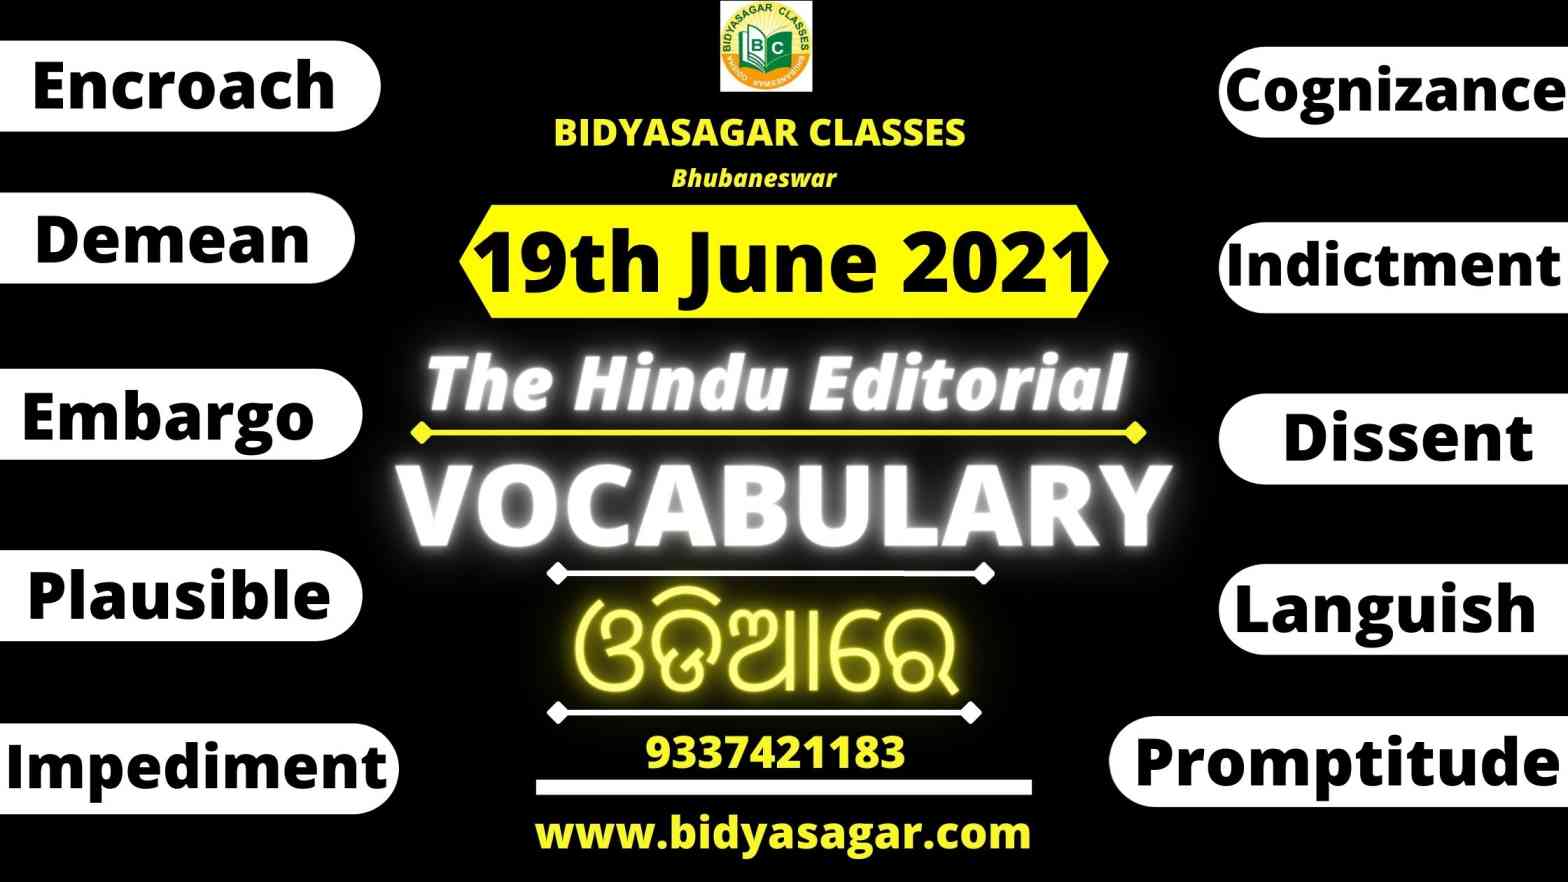 The Hindu Editorial Vocabulary of 19th June 2021